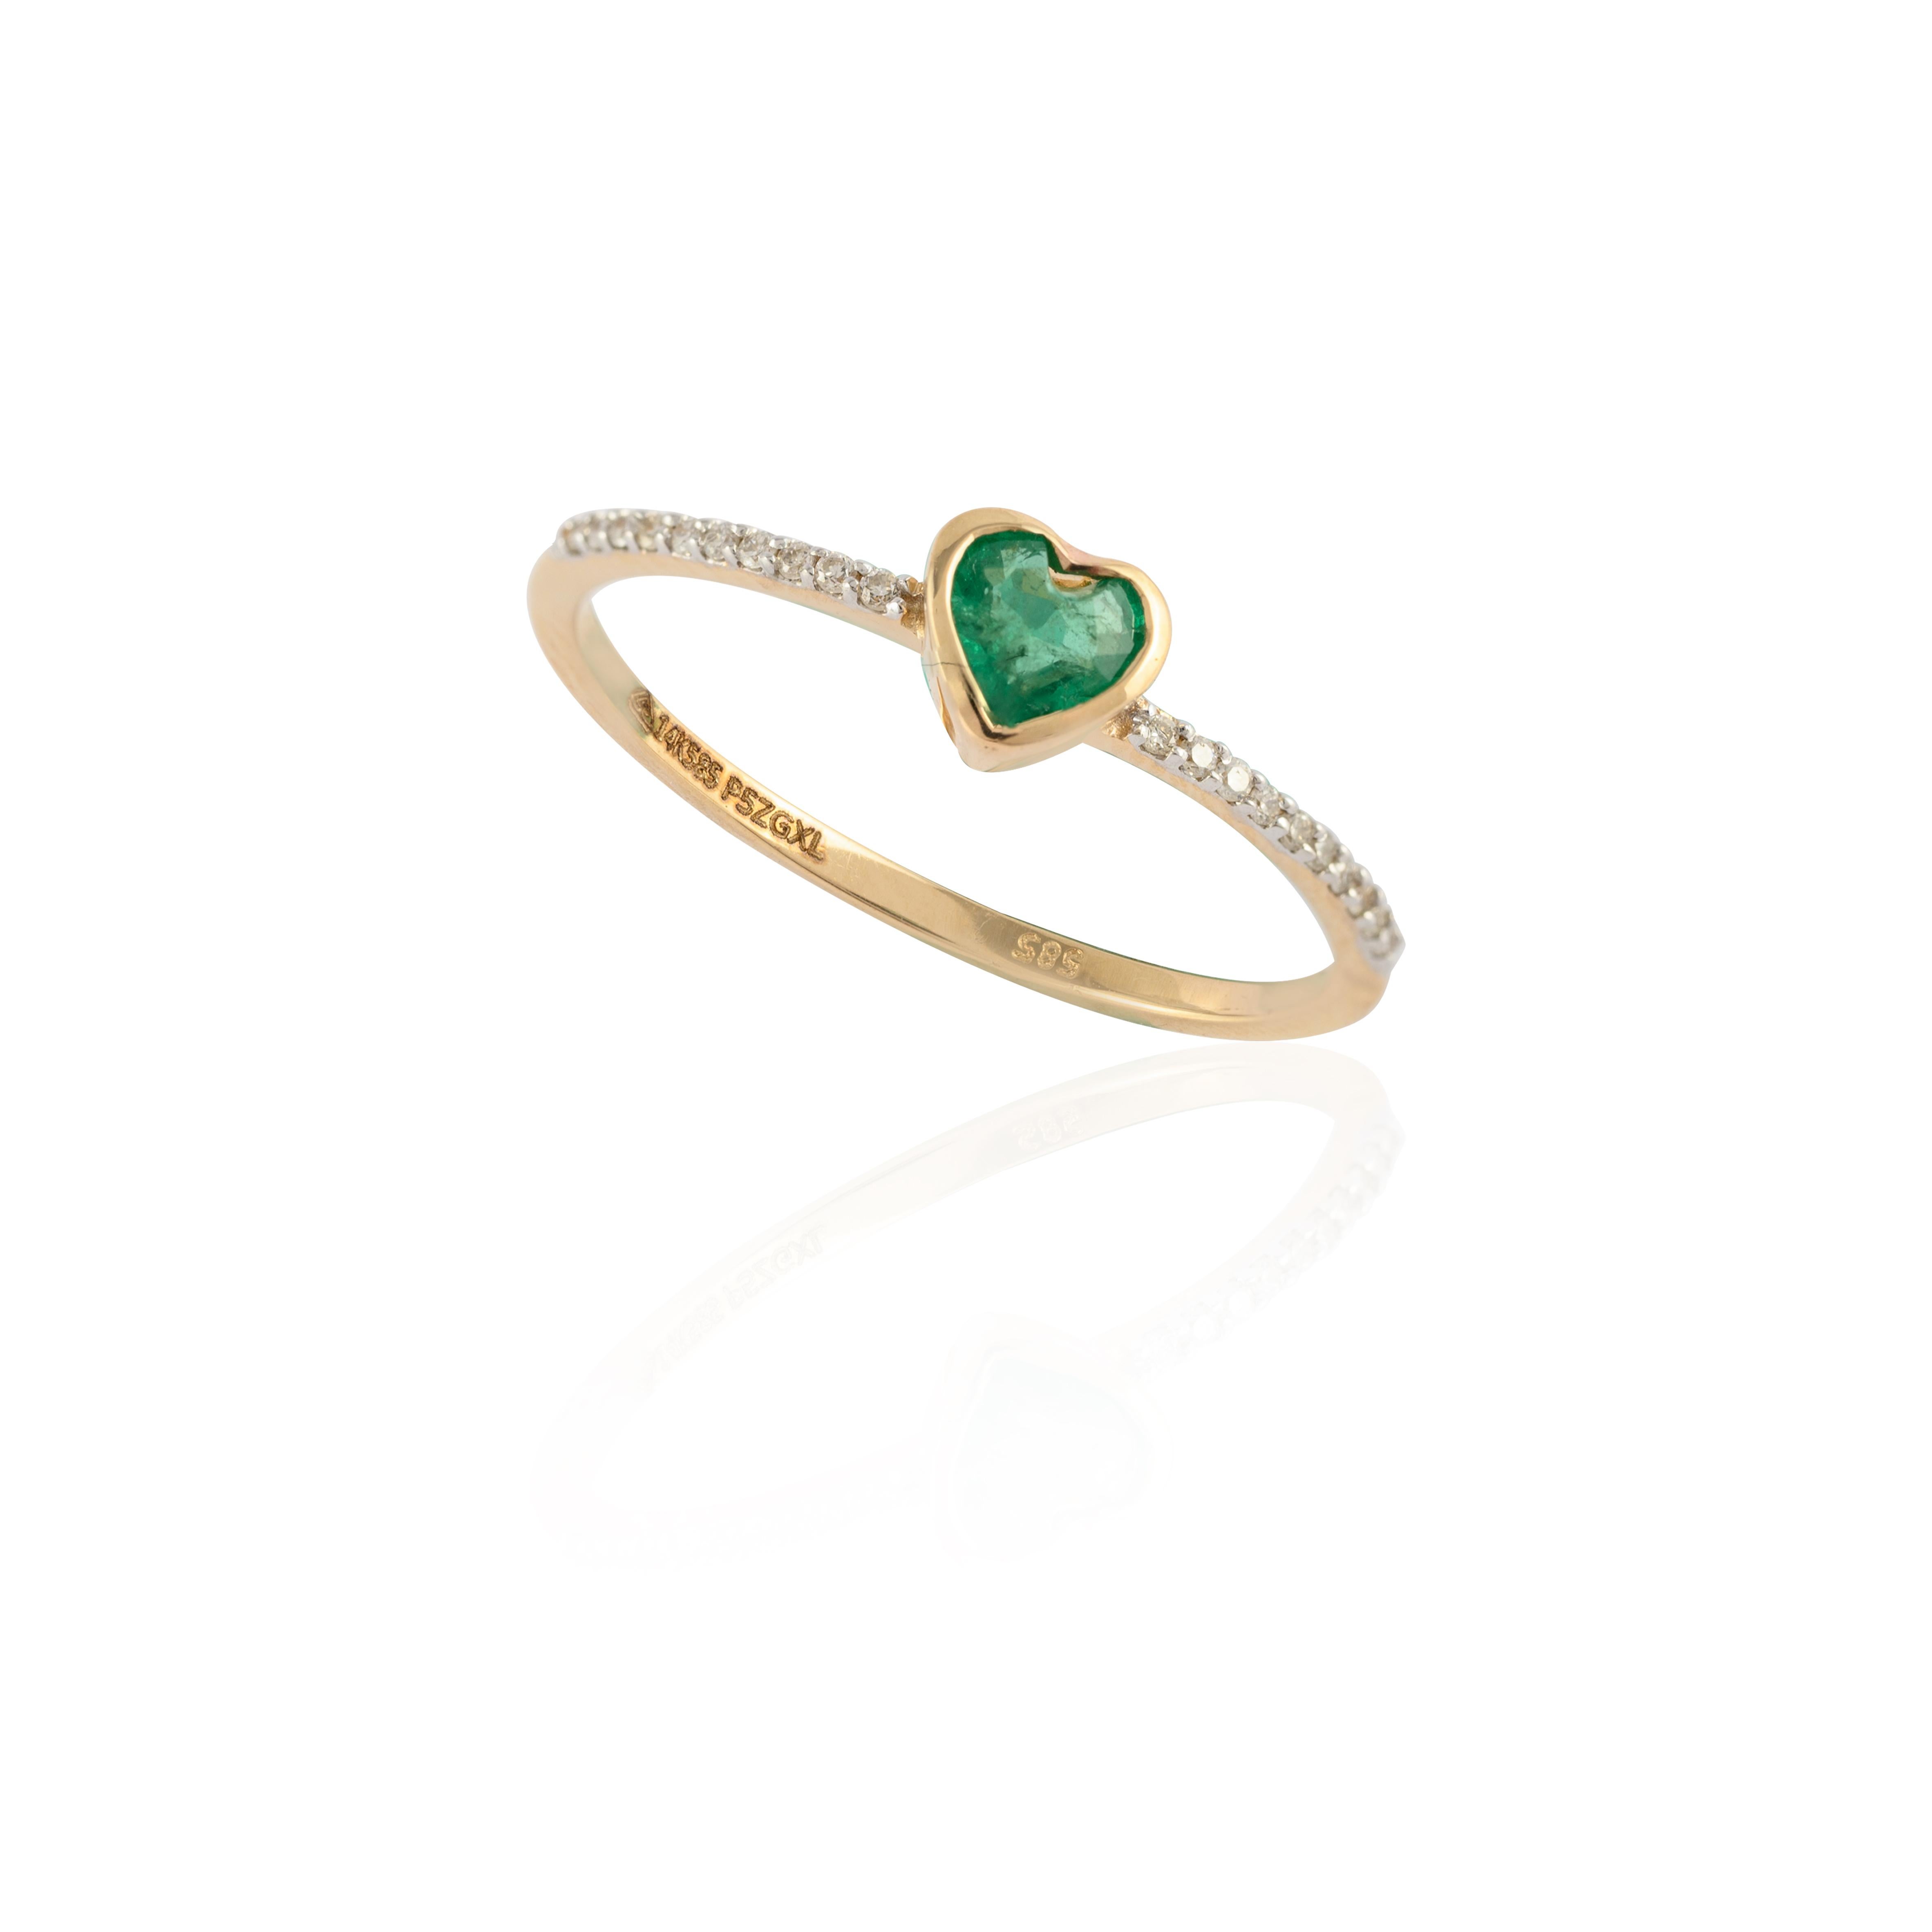 For Sale:  Minimalist Heart Cut Emerald Ring Set in 14k Solid Yellow Gold with Diamonds 5